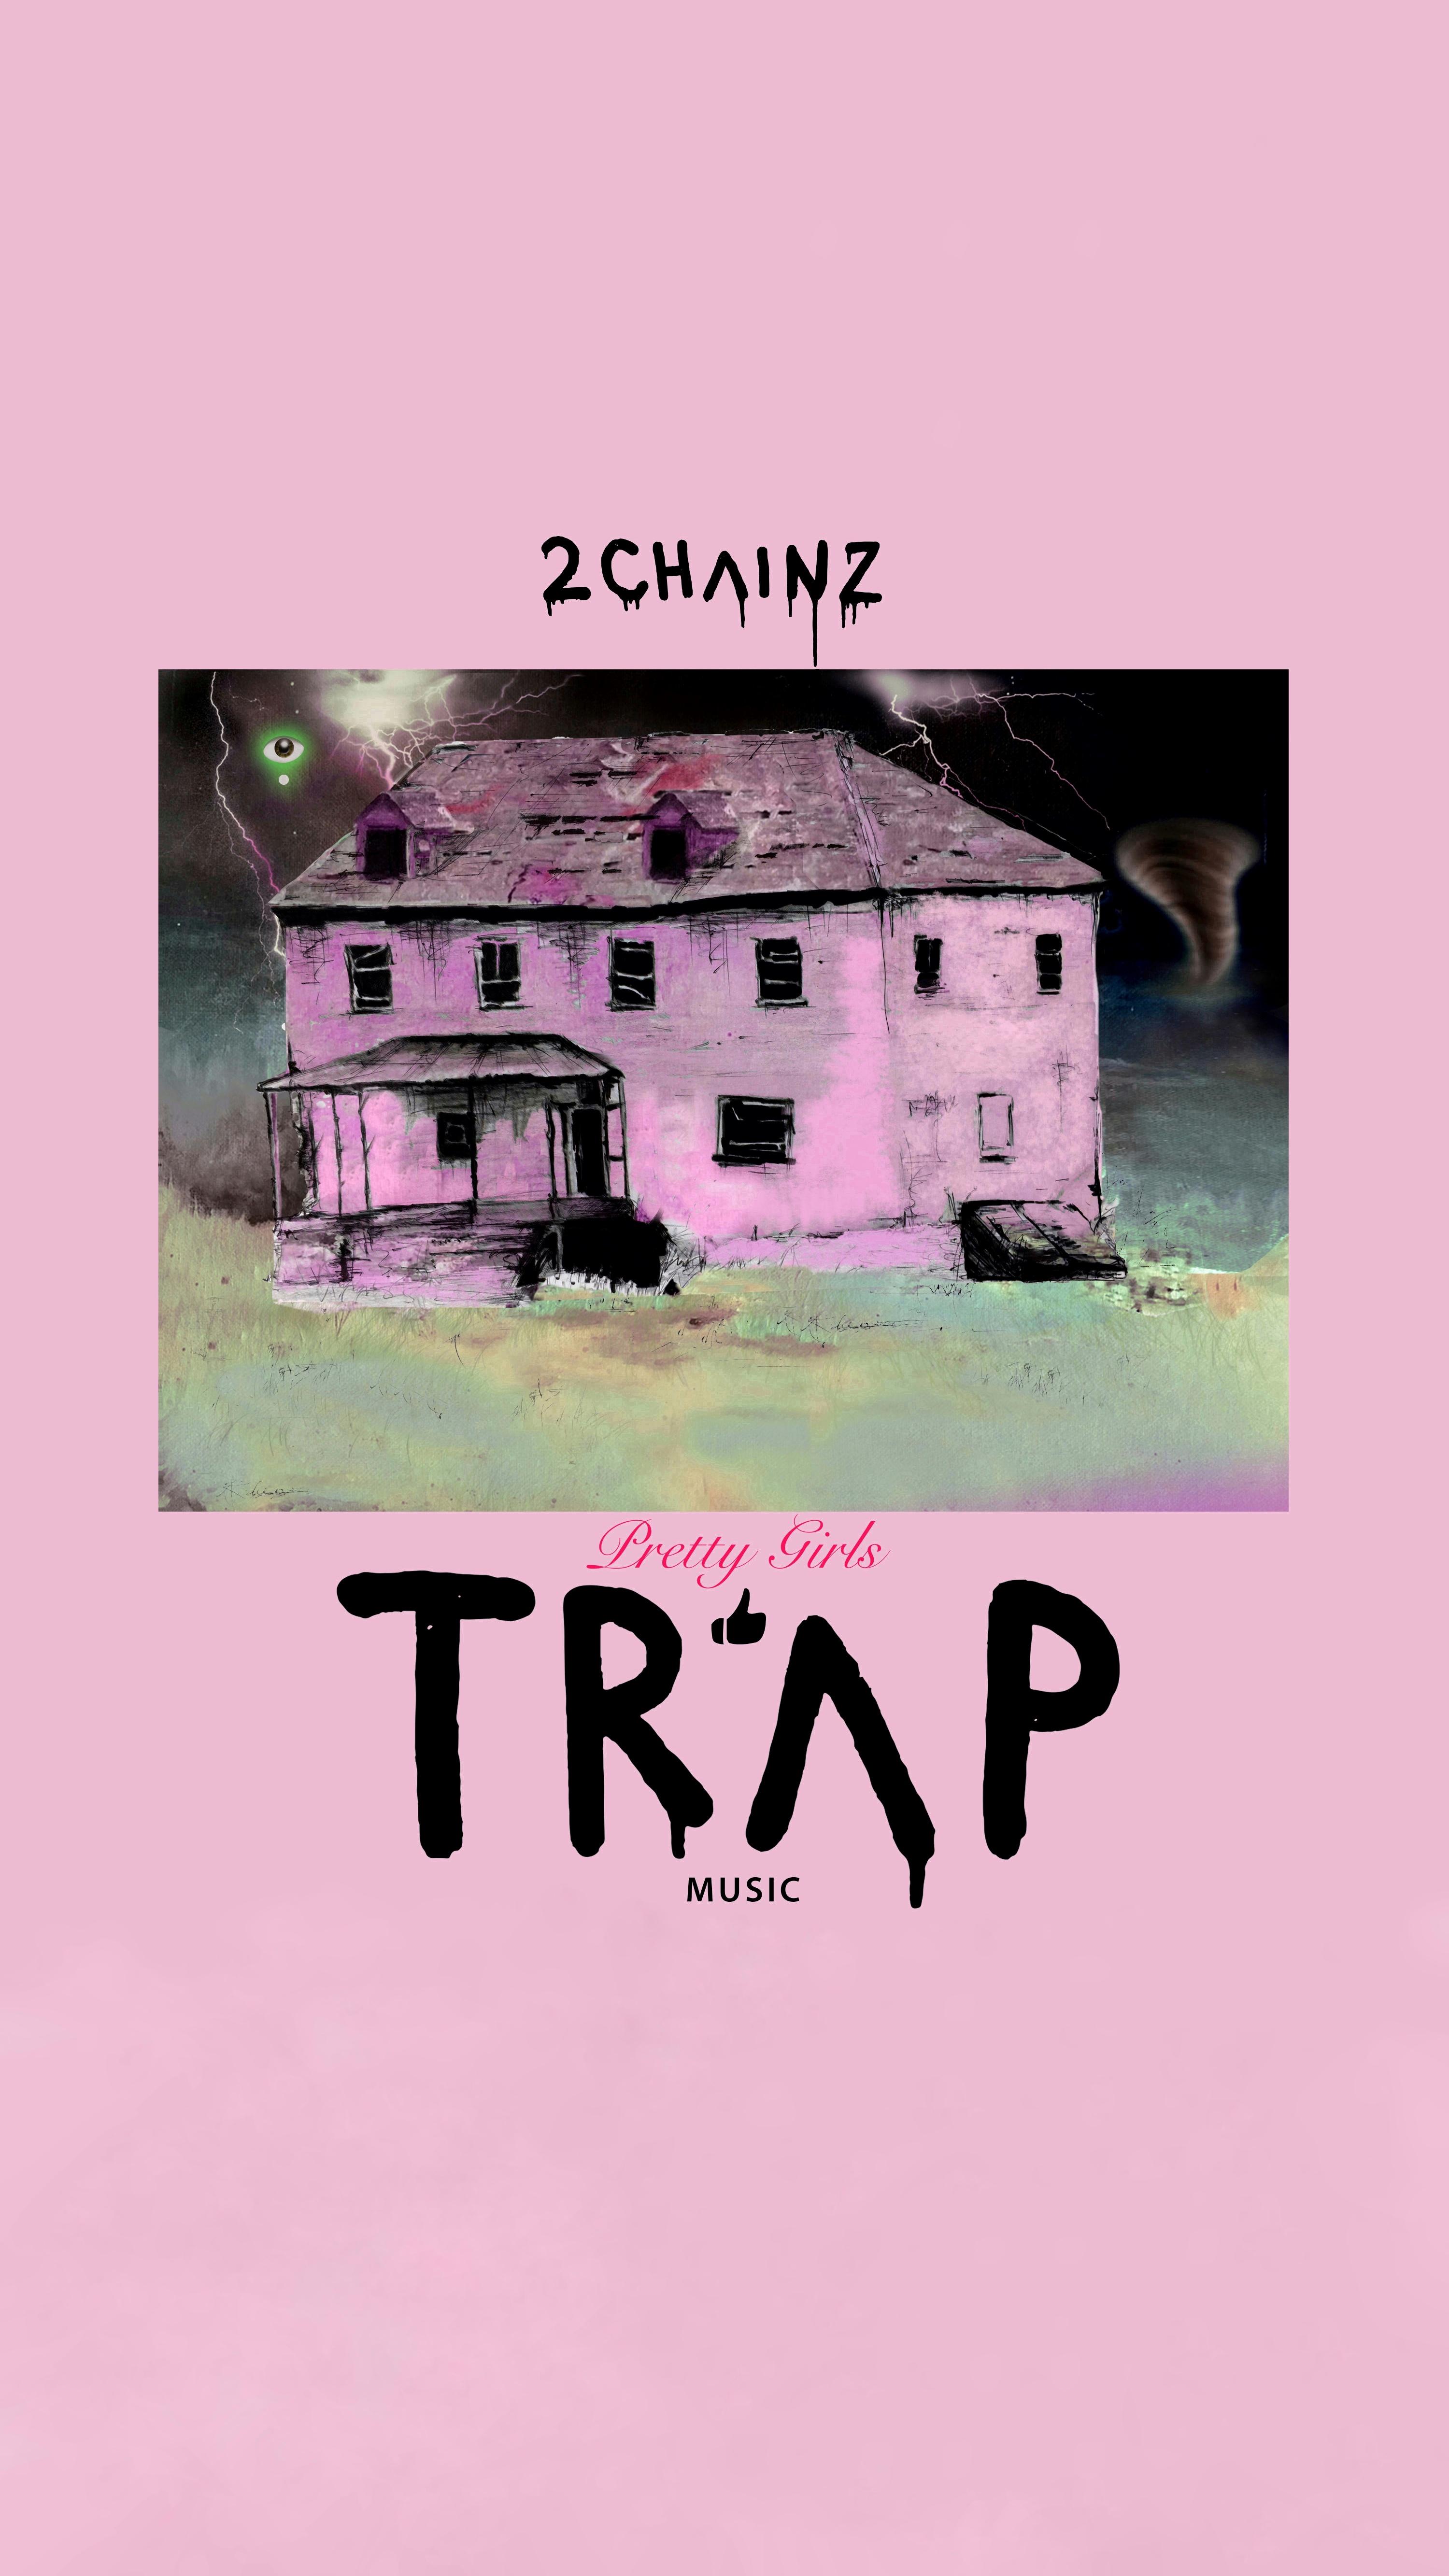 Mobile Wallpapers] 2 Chainz - Pretty Girls Like Trap Music